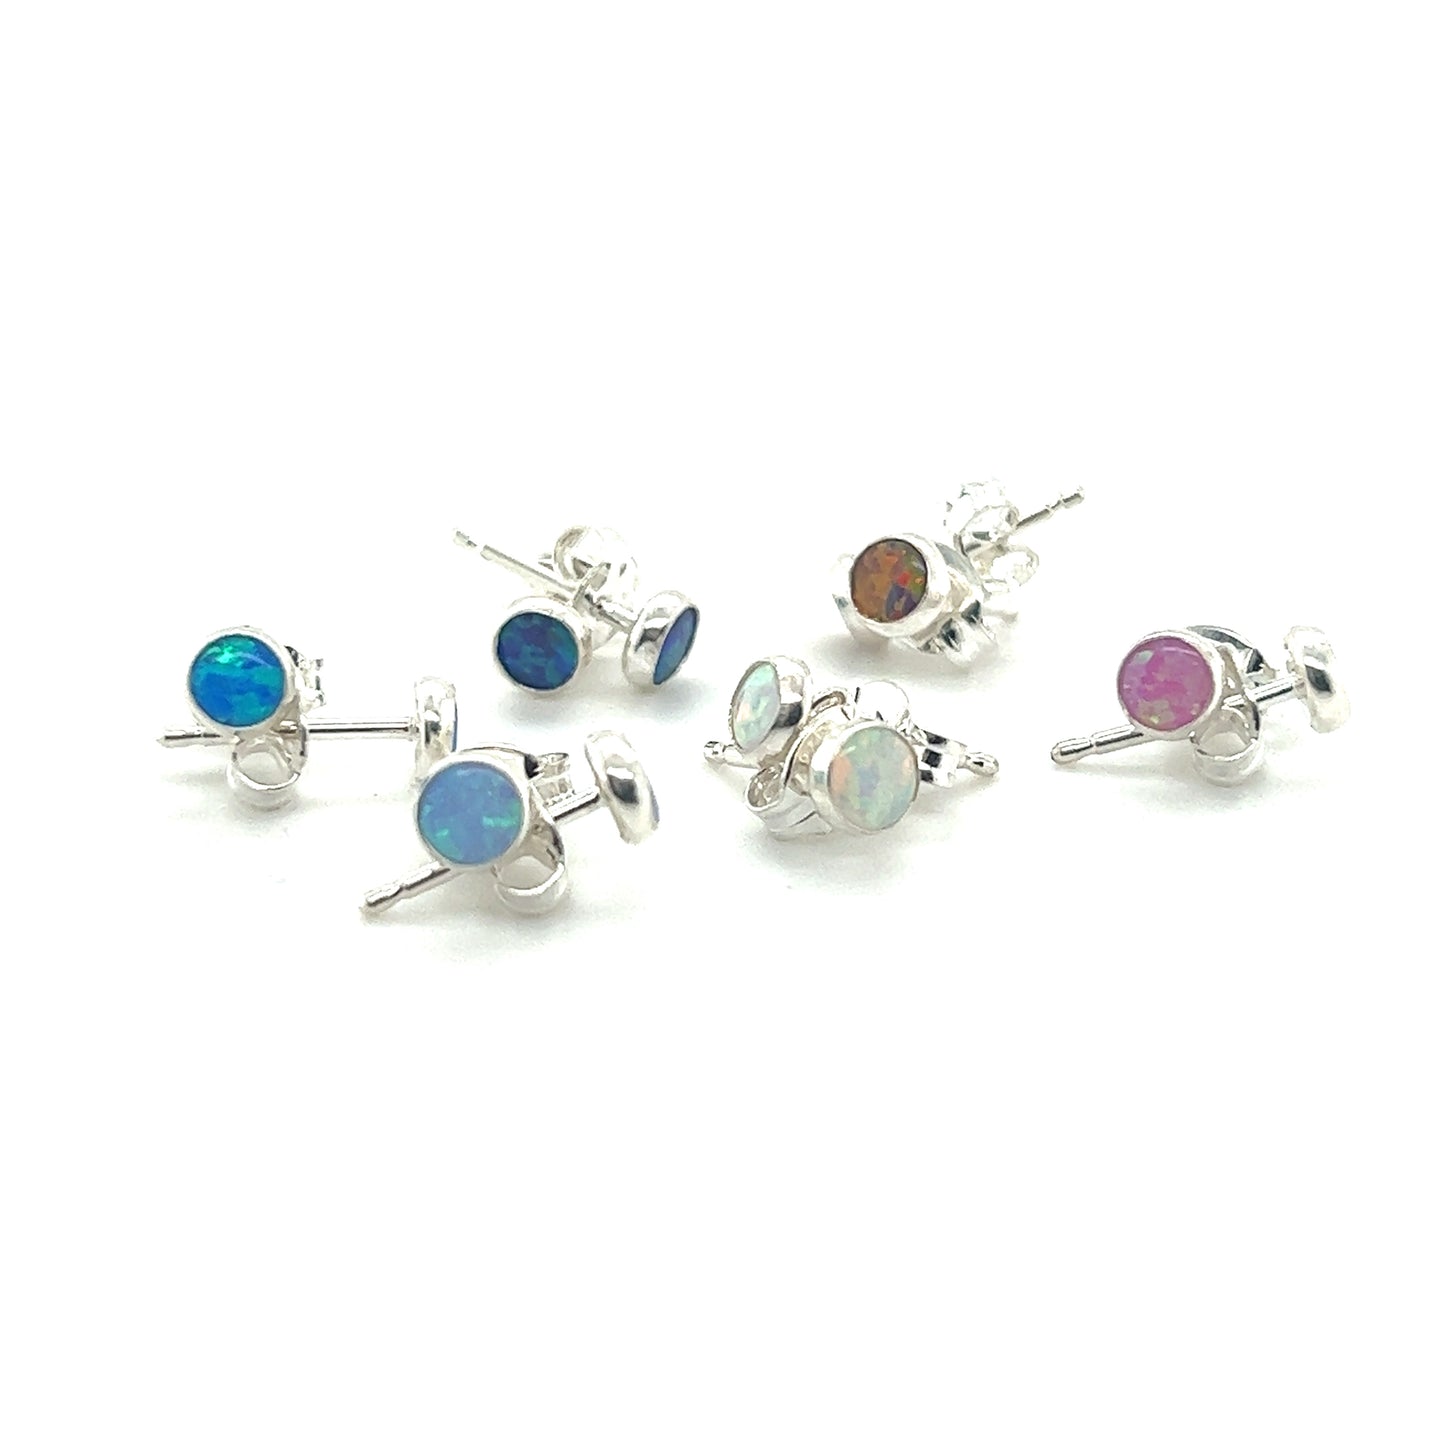 A collection of Dainty Opal Studs with minimalist designs on a white background.